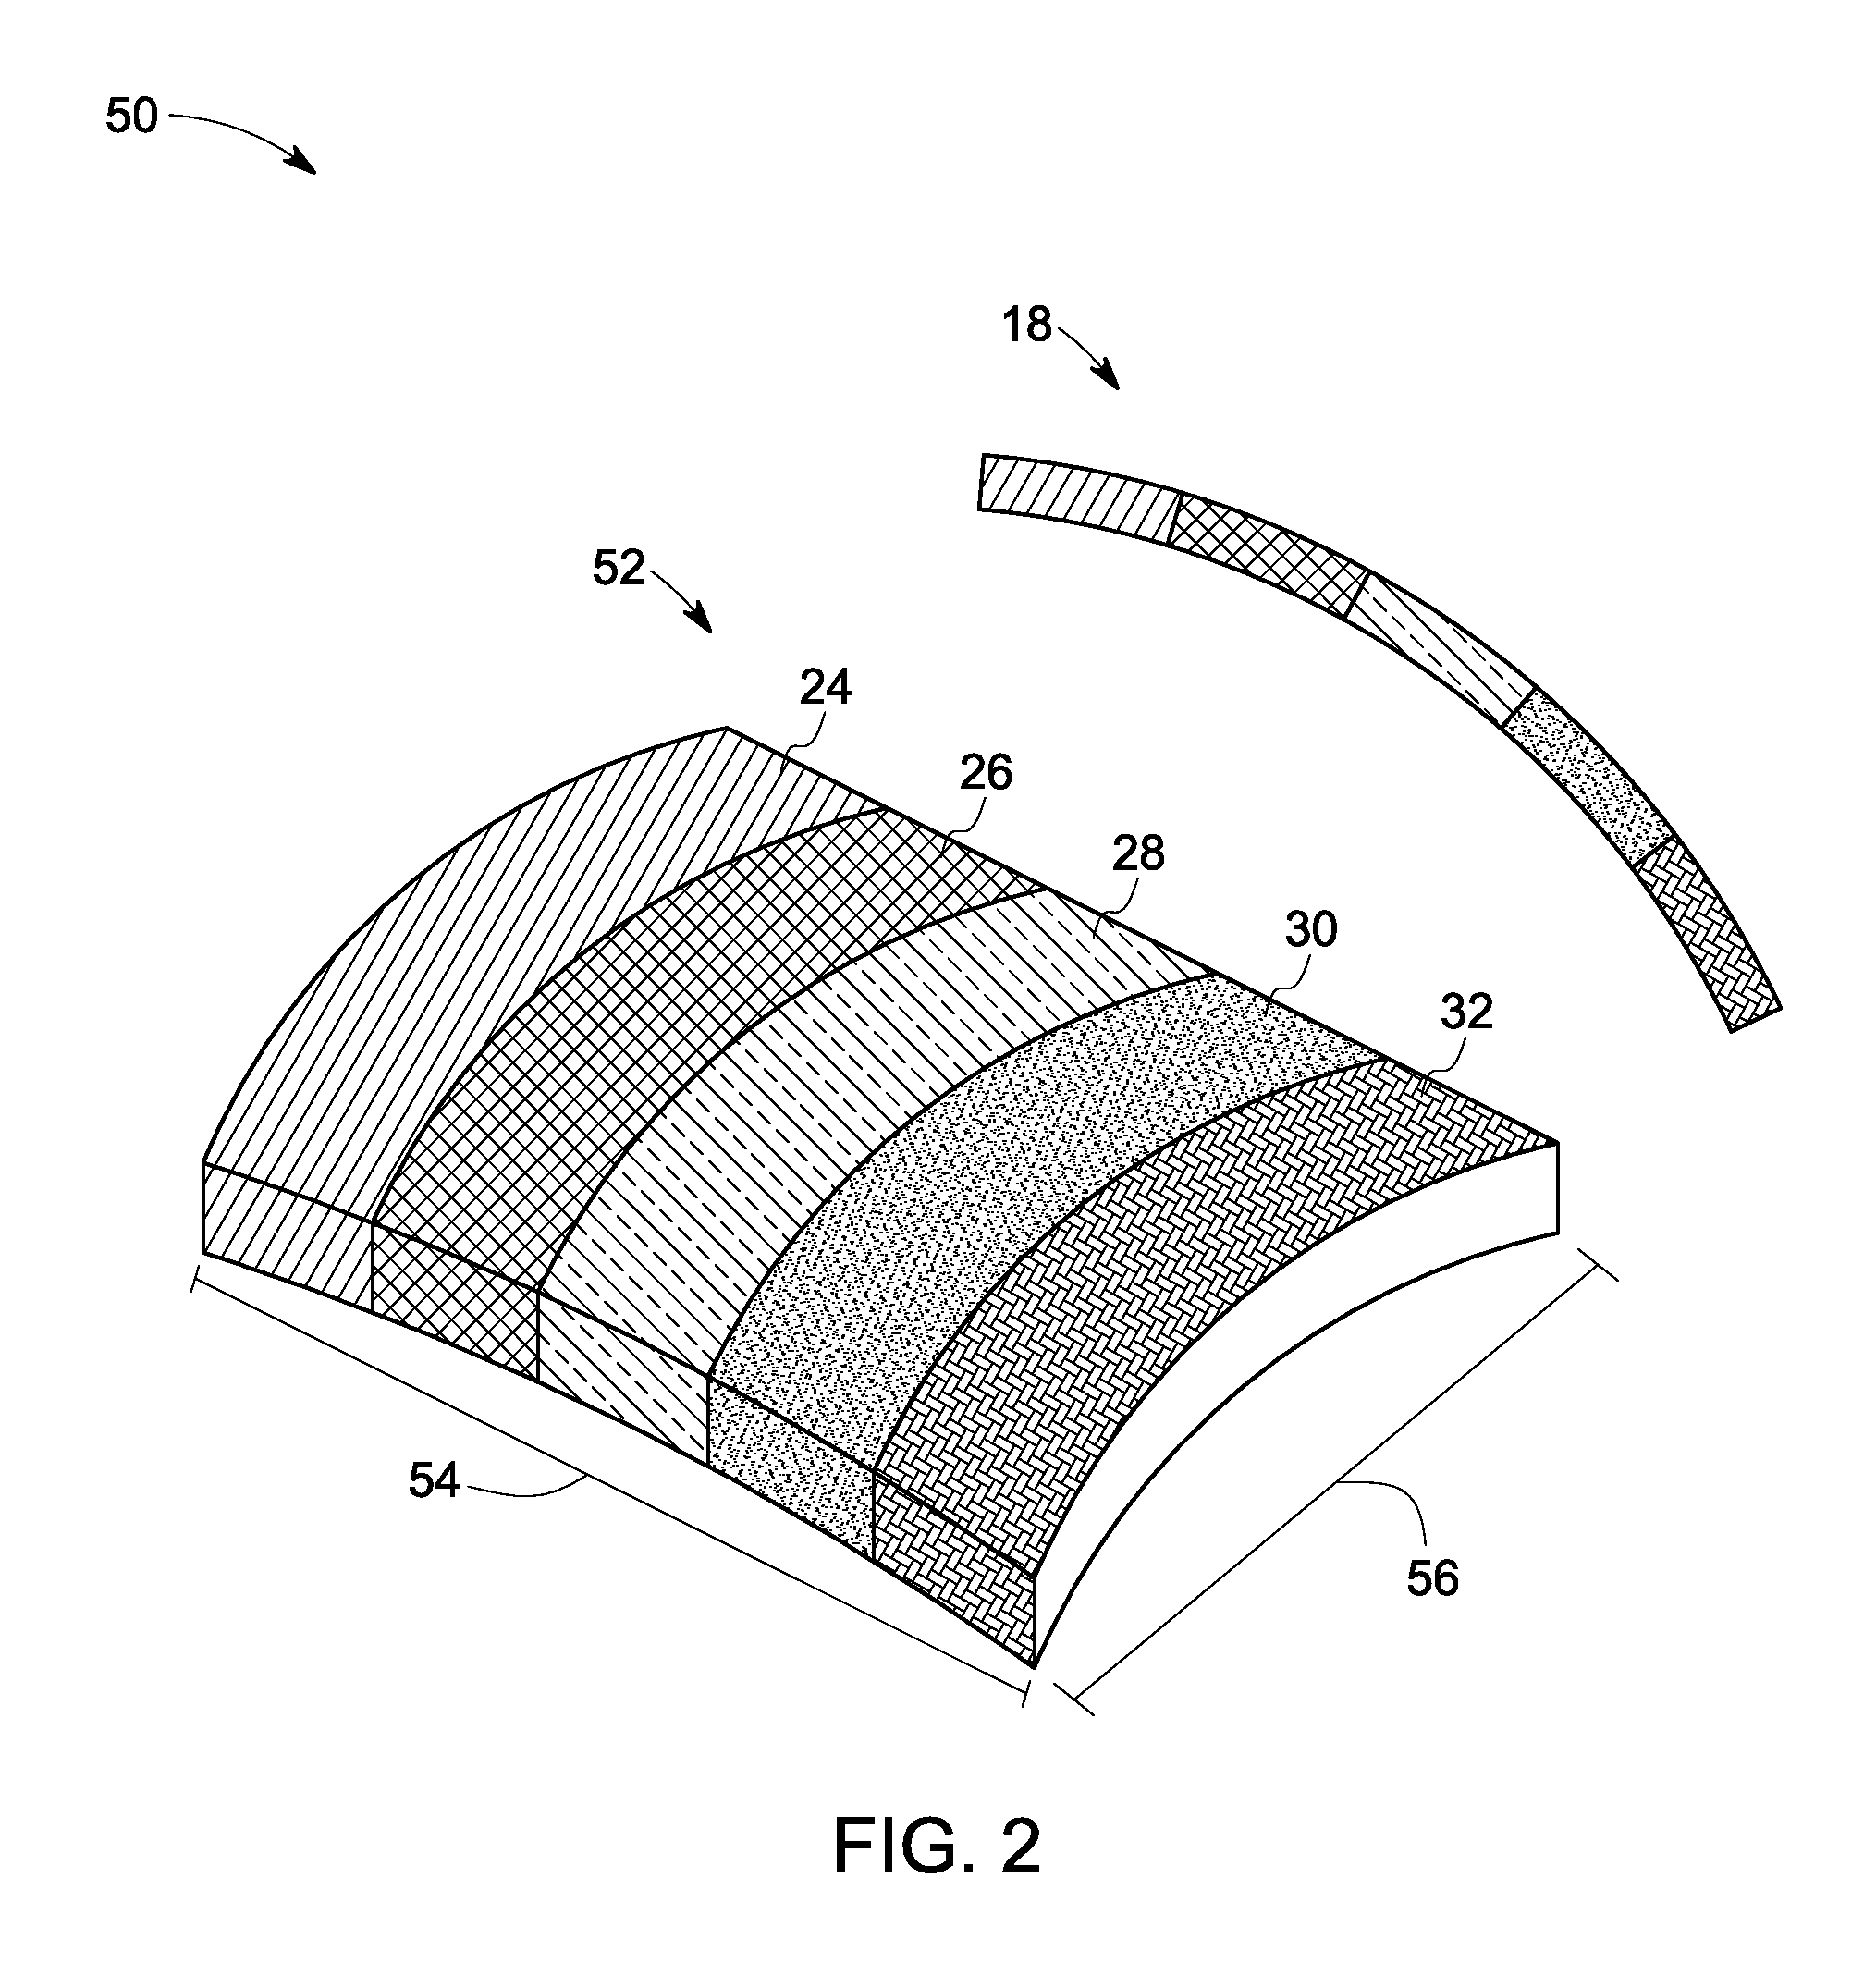 Elemental composition detection system and method